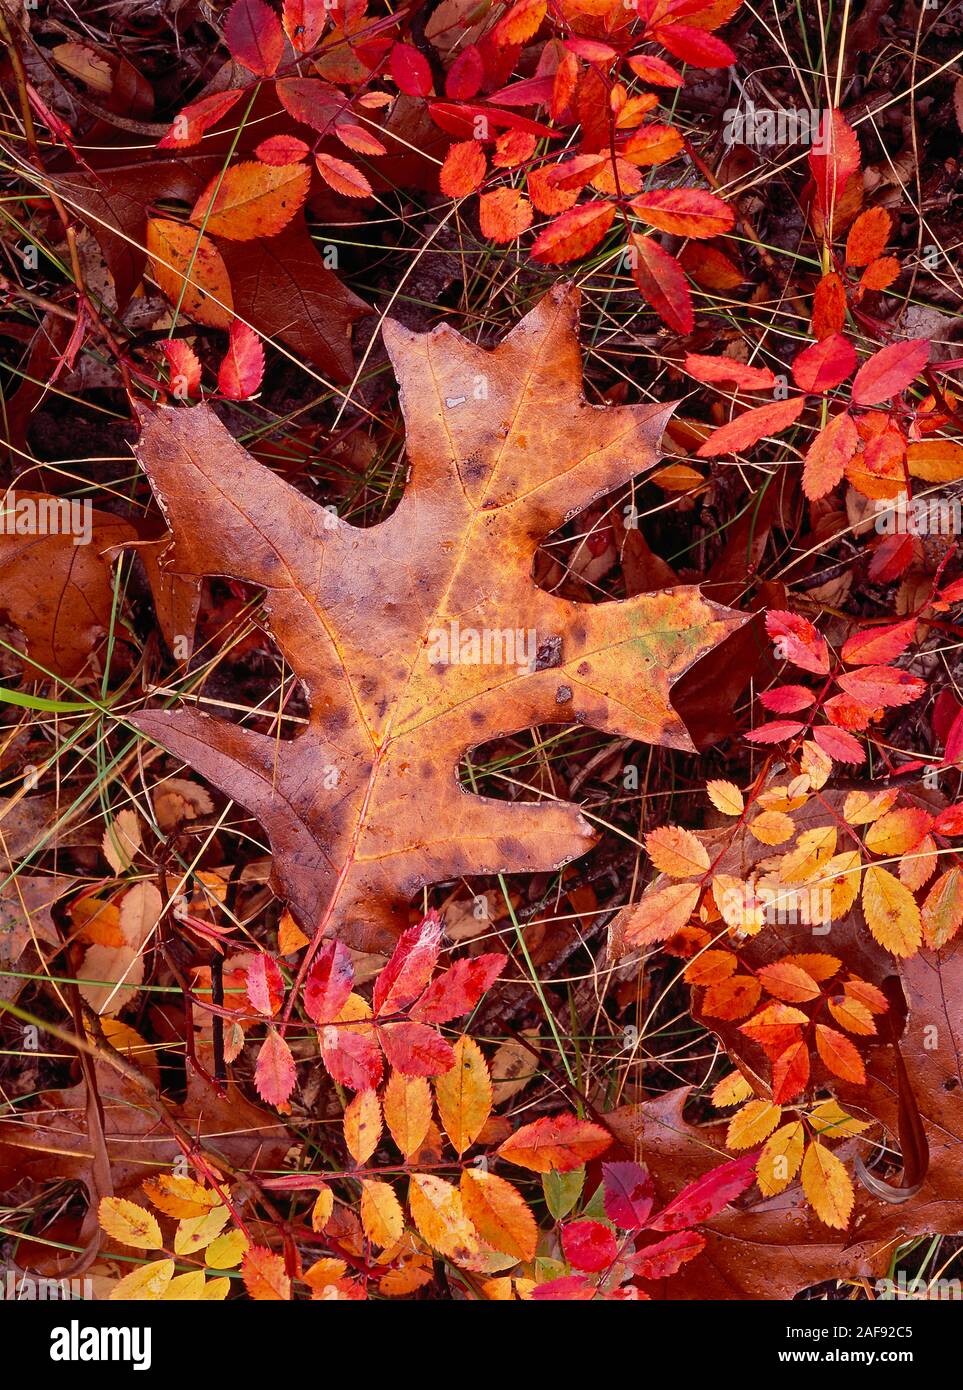 Red, orange, and yellow colors of autumn black oak leaves (species Quercus velutina) and foliage of pasture rose (Rosa carolina) in the sand savanna. Stock Photo